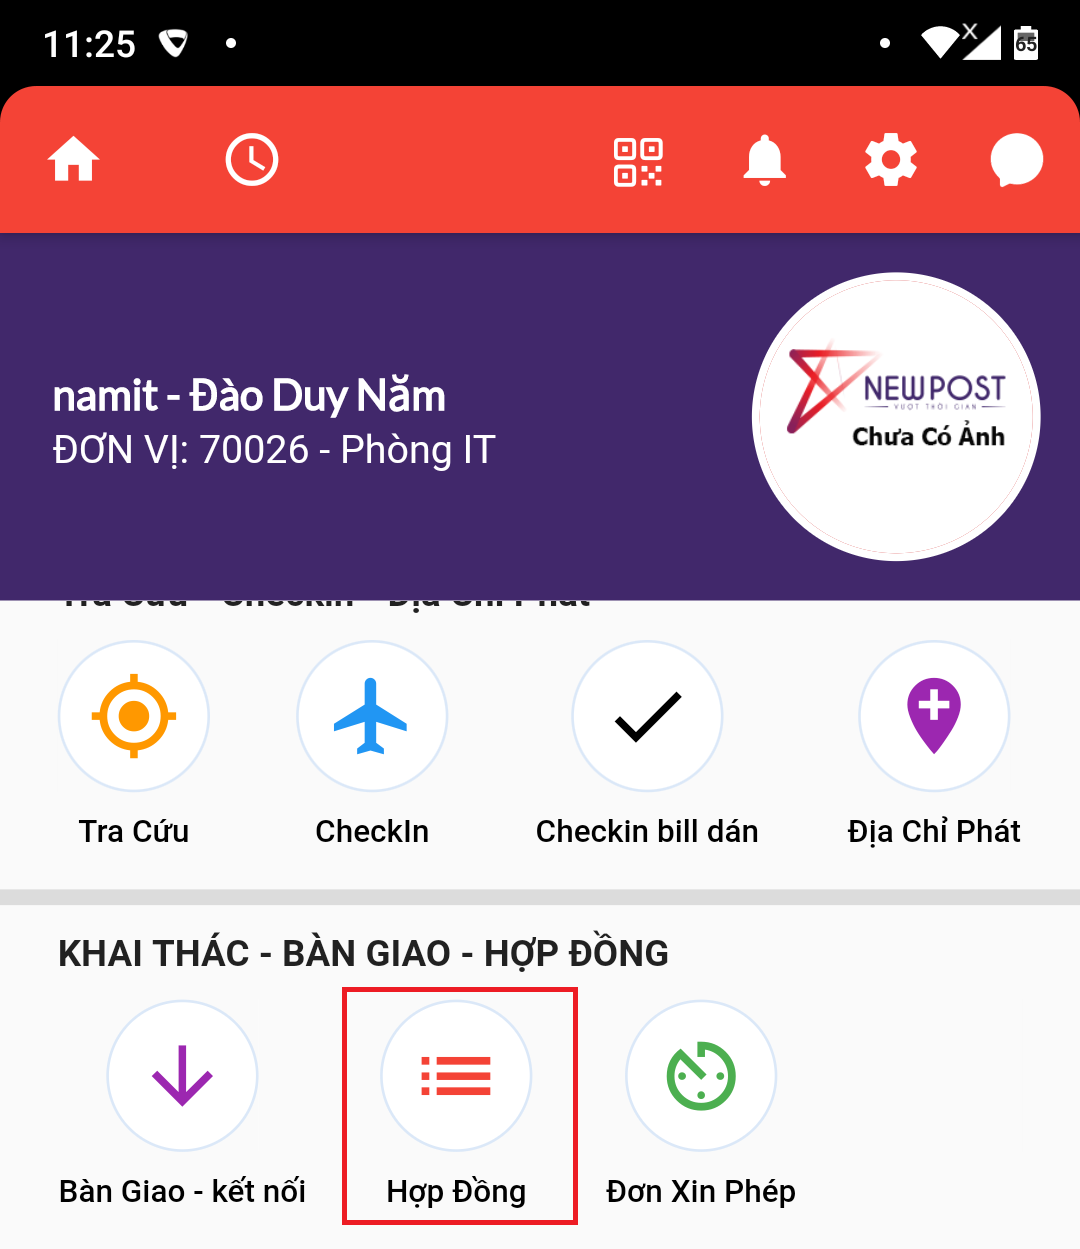 cach-upload-anh-chinh-sua-hop-dong-tren-app-newpost (2)